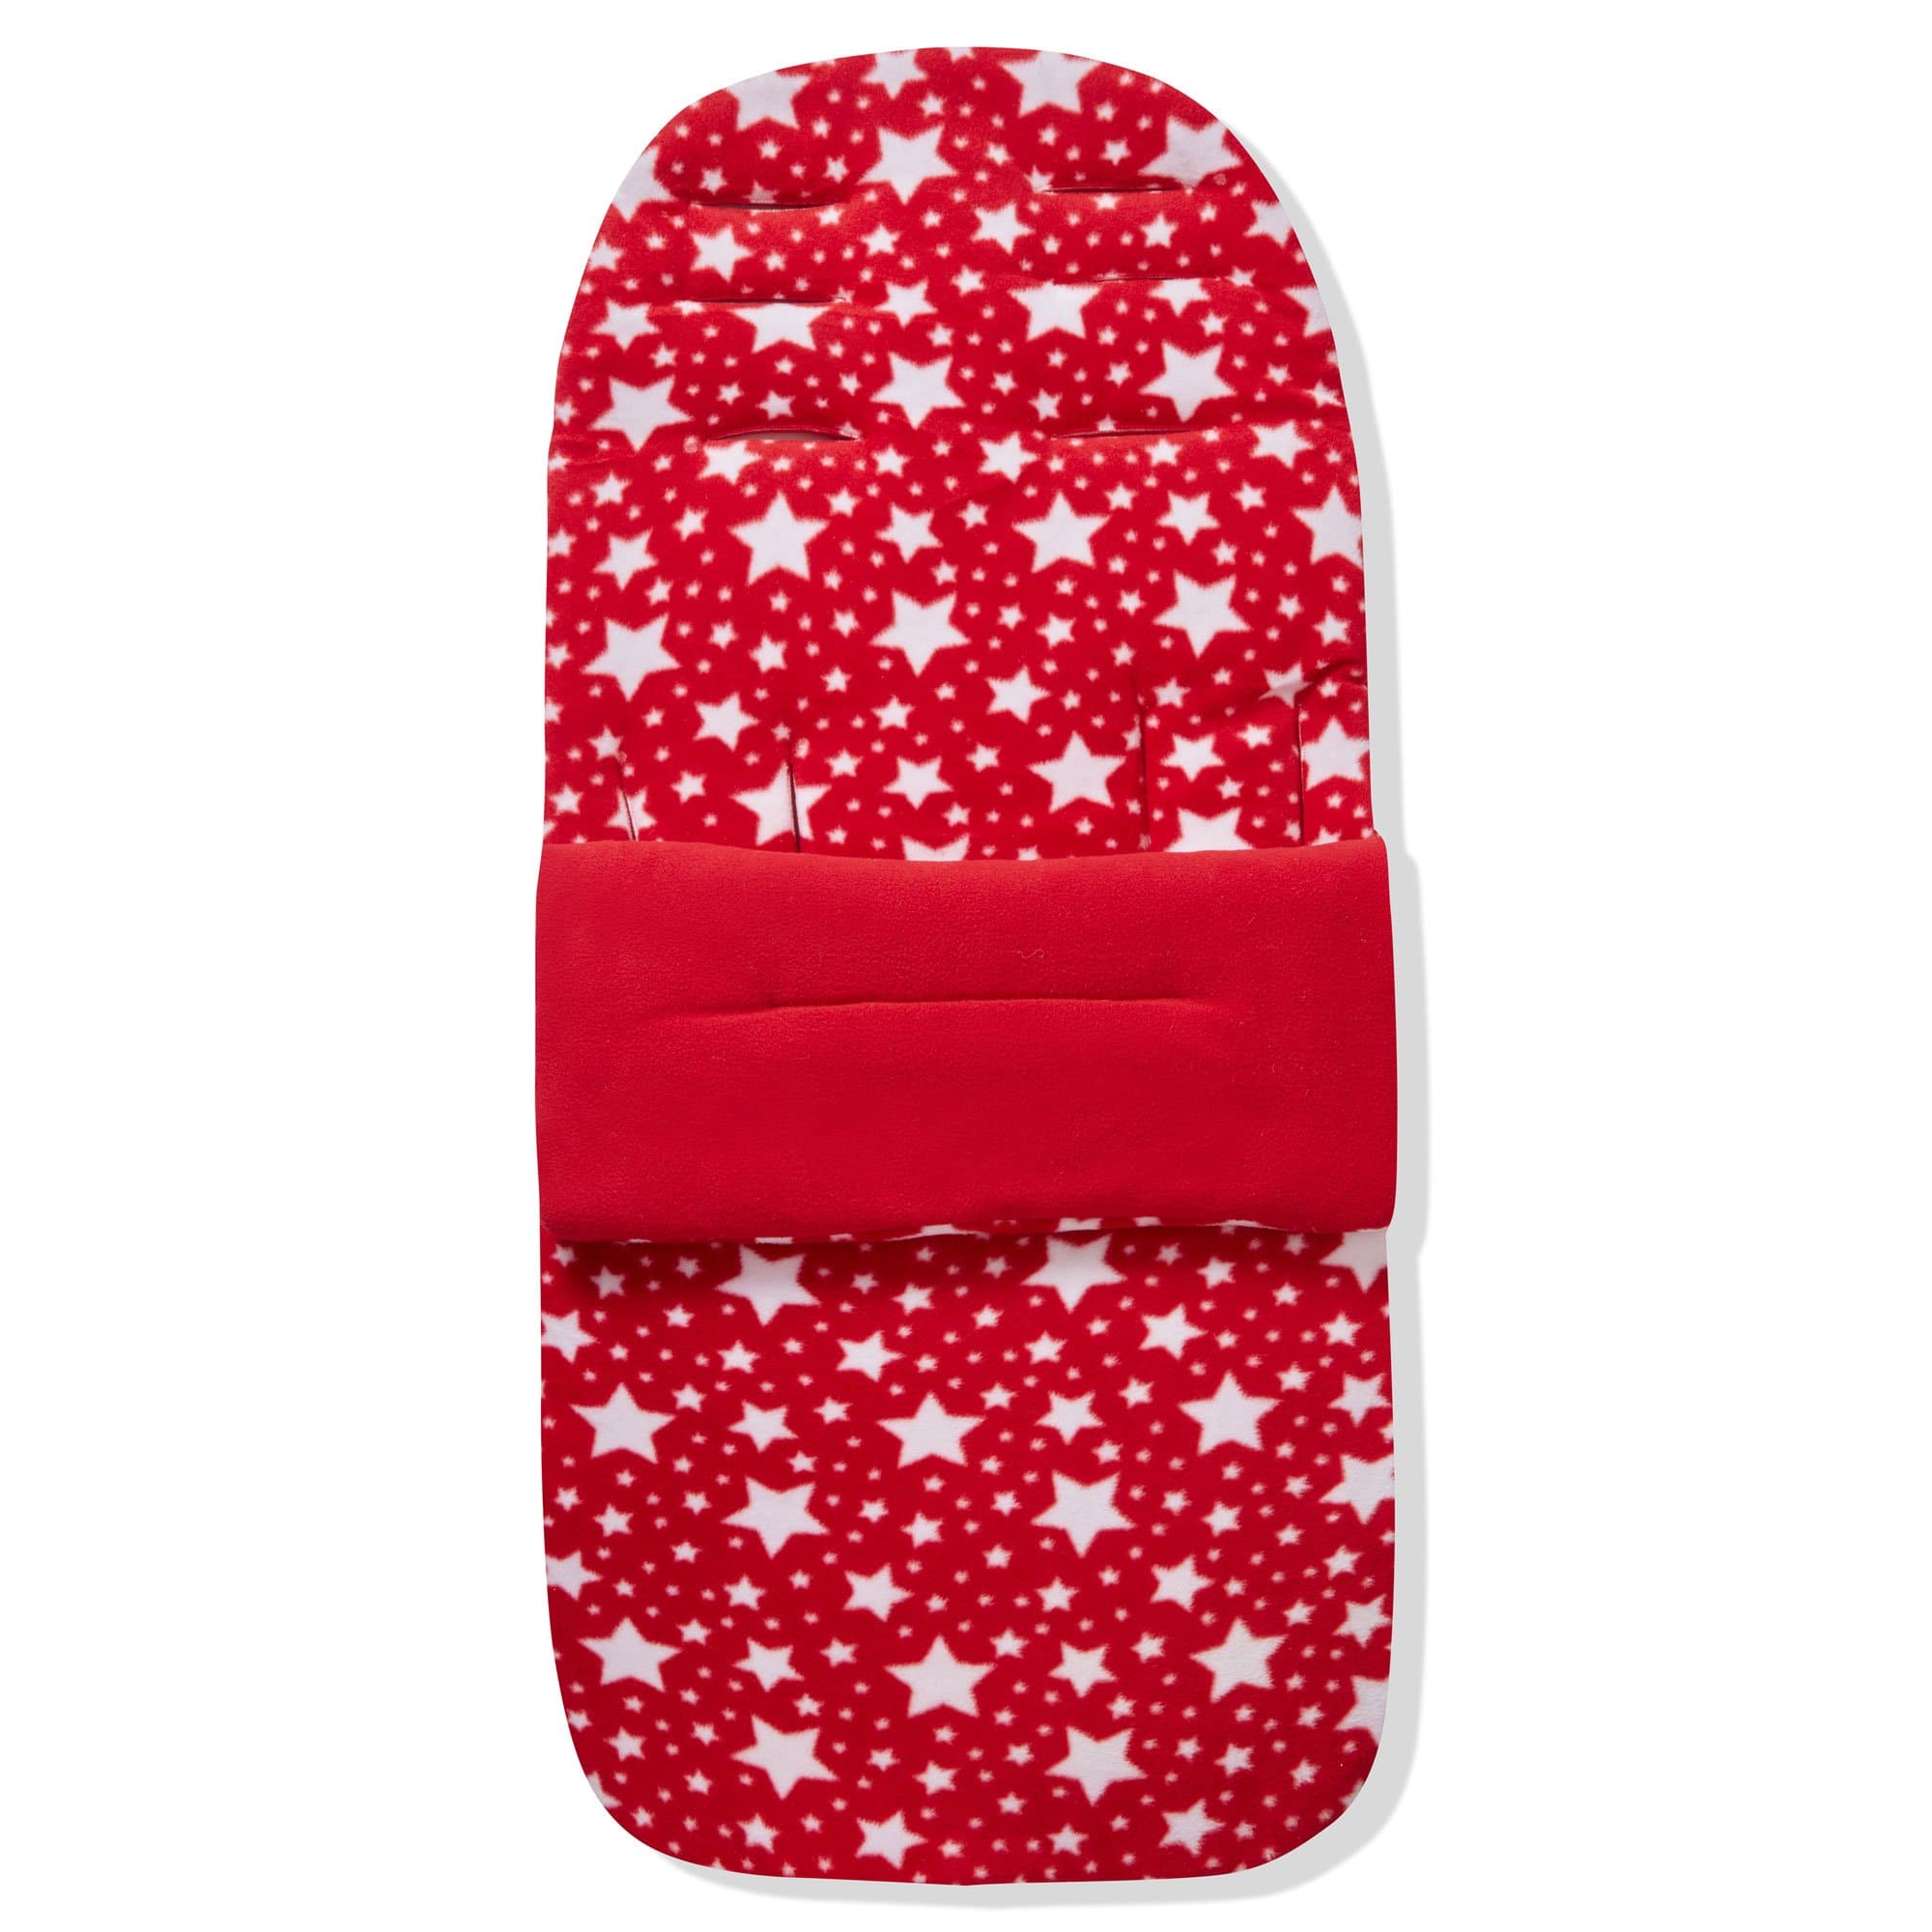 Fleece Footmuff / Cosy Toes Compatible with Unilove - Red Star / Fits All Models | For Your Little One